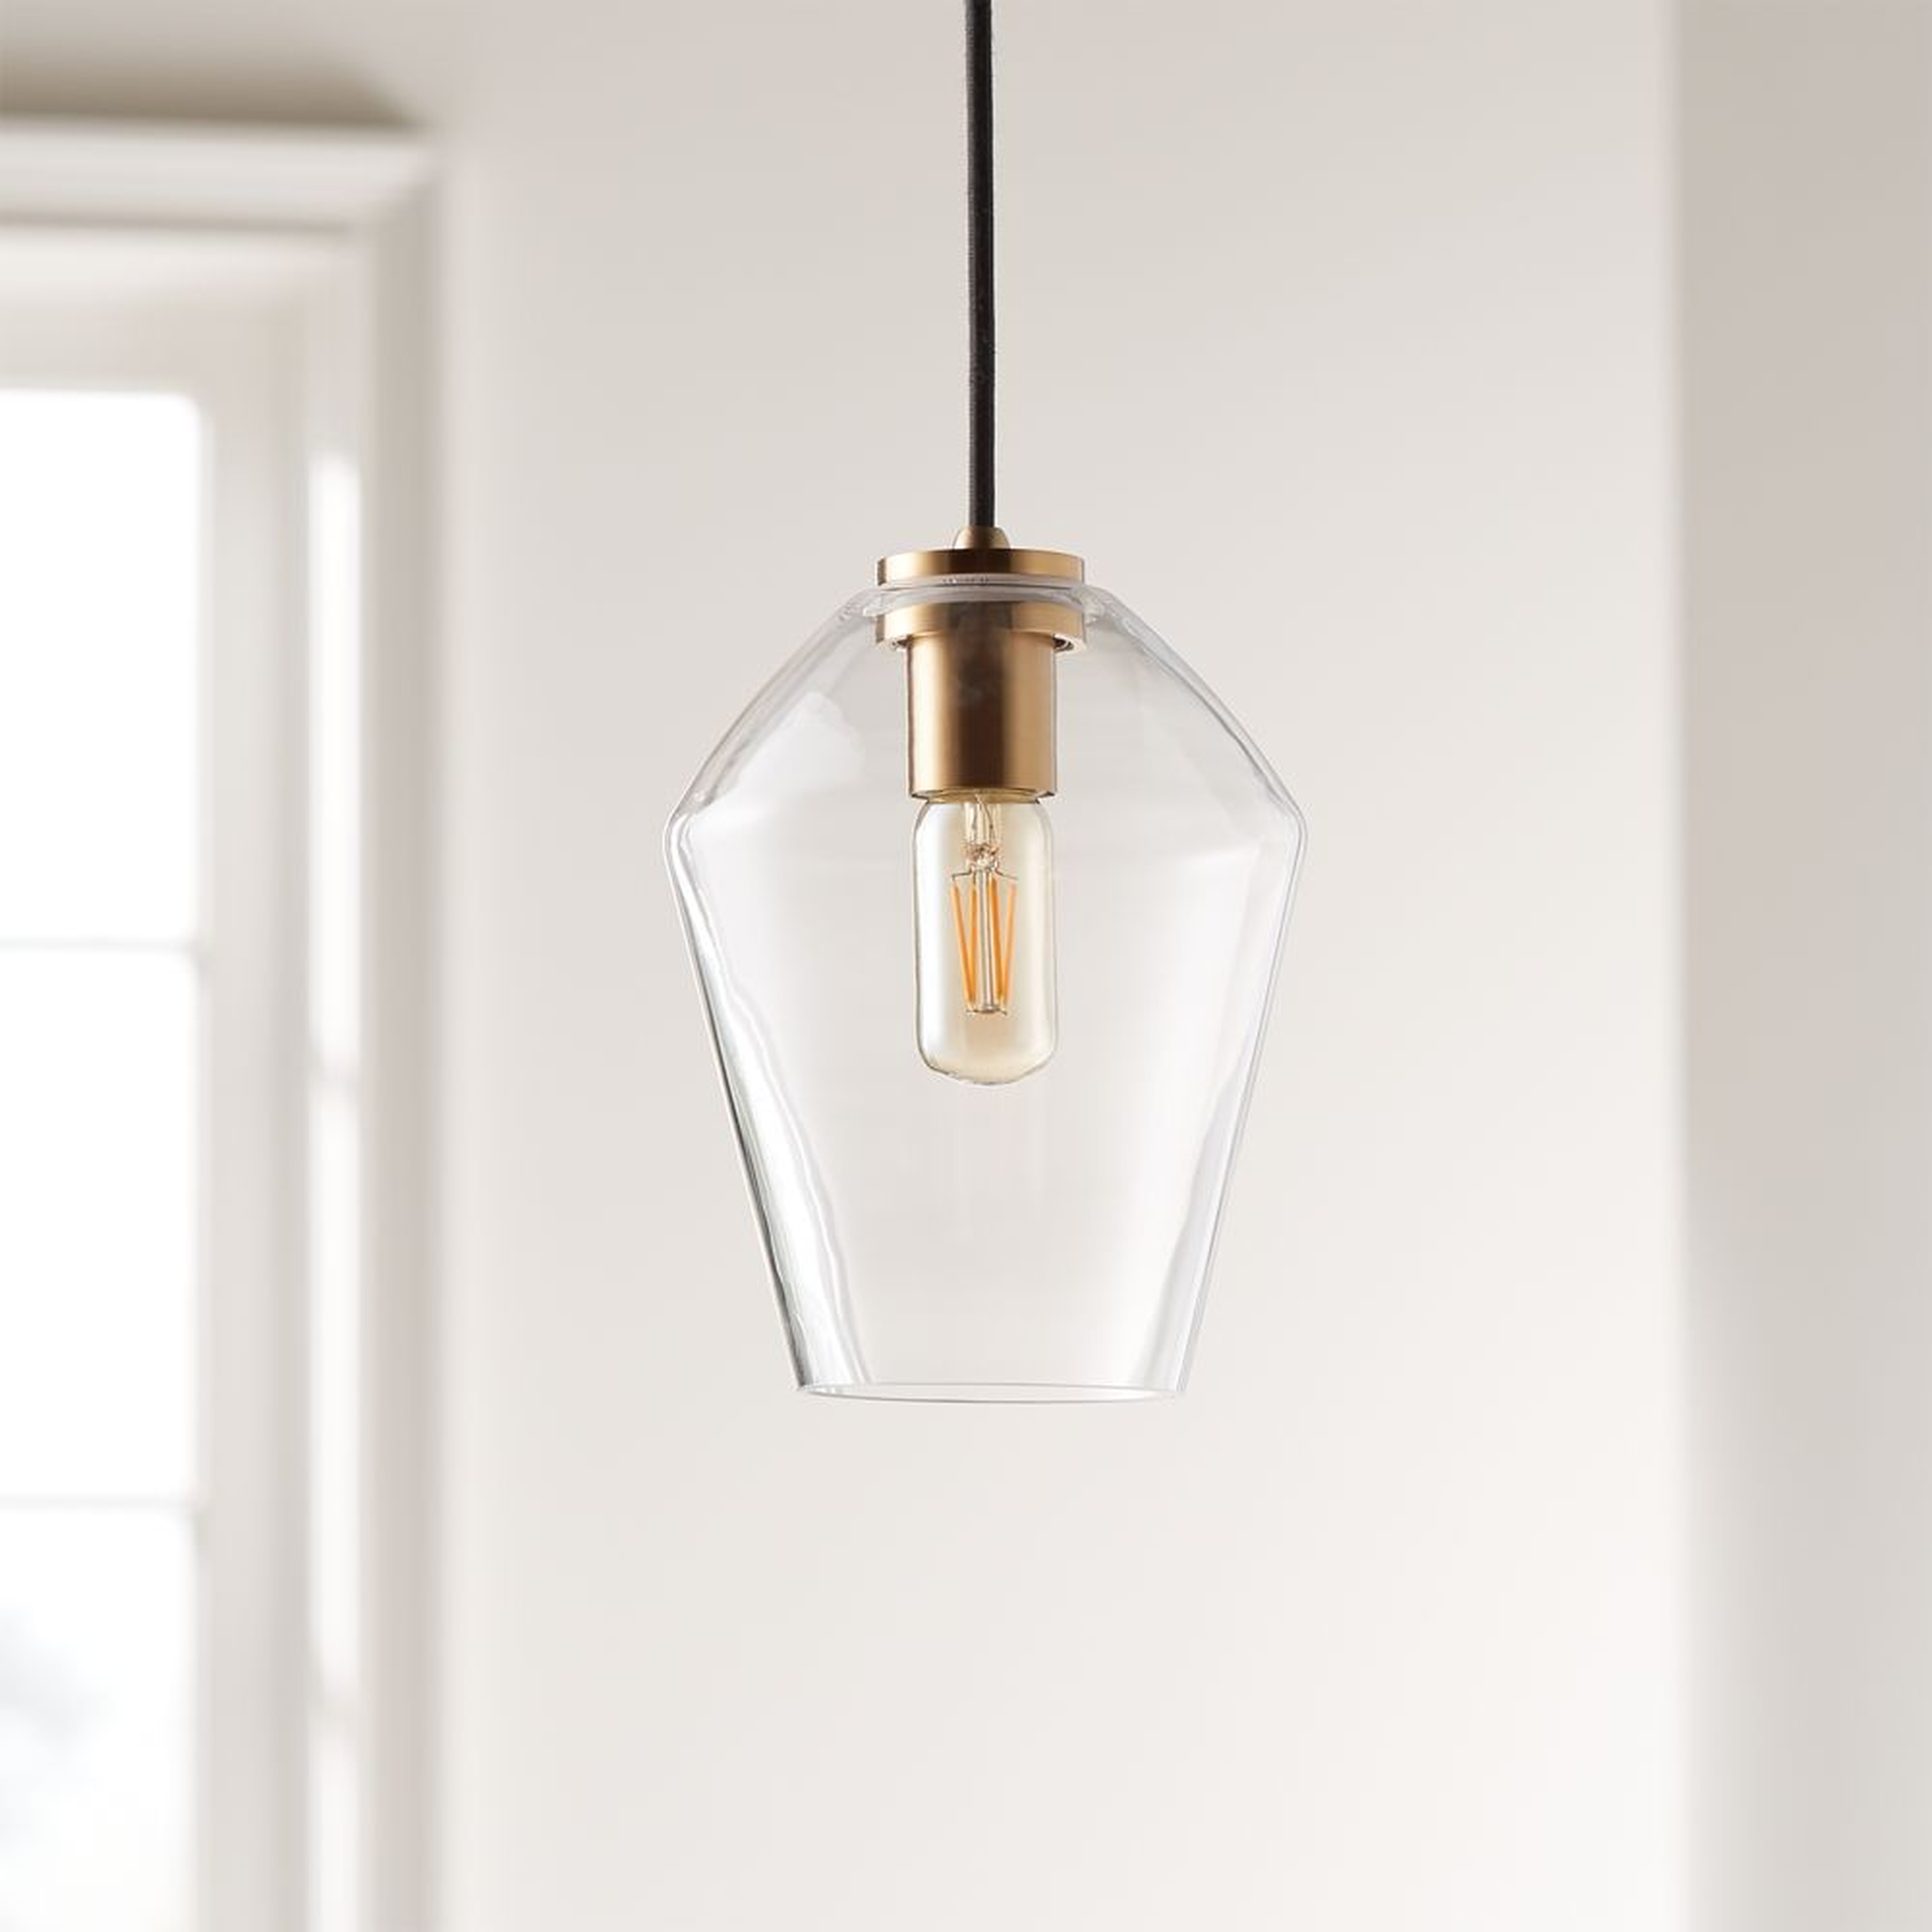 Arren Brass Single Pendant Light with Clear Angled Shade - Crate and Barrel